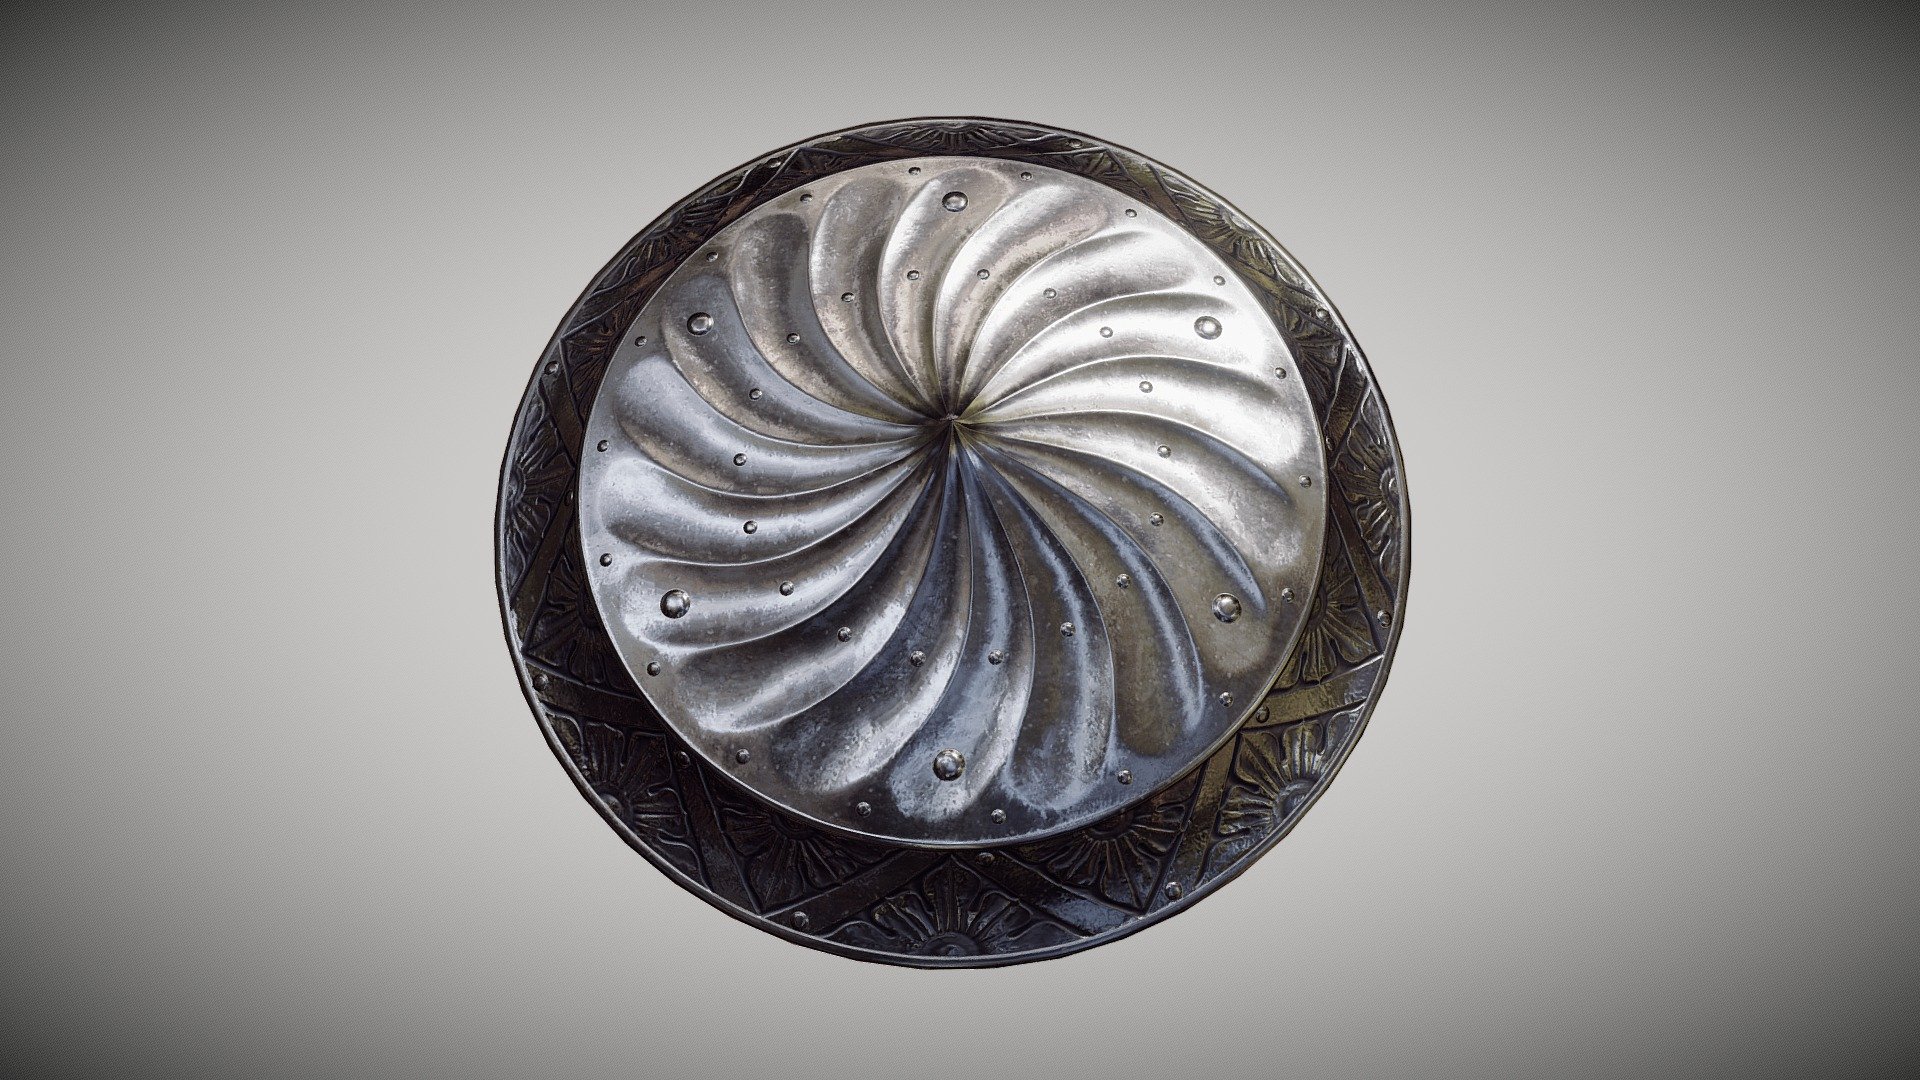 Steel Renaissance Shield with spiral pattern and decorated rim.

Low-poly, PBR. Includes High-poly files.

Collection of my other historical models:
https://sketchfab.com/avatrass/collections/historical-item-models - Decorated Renaissance Shield - Buy Royalty Free 3D model by avatrass 3d model